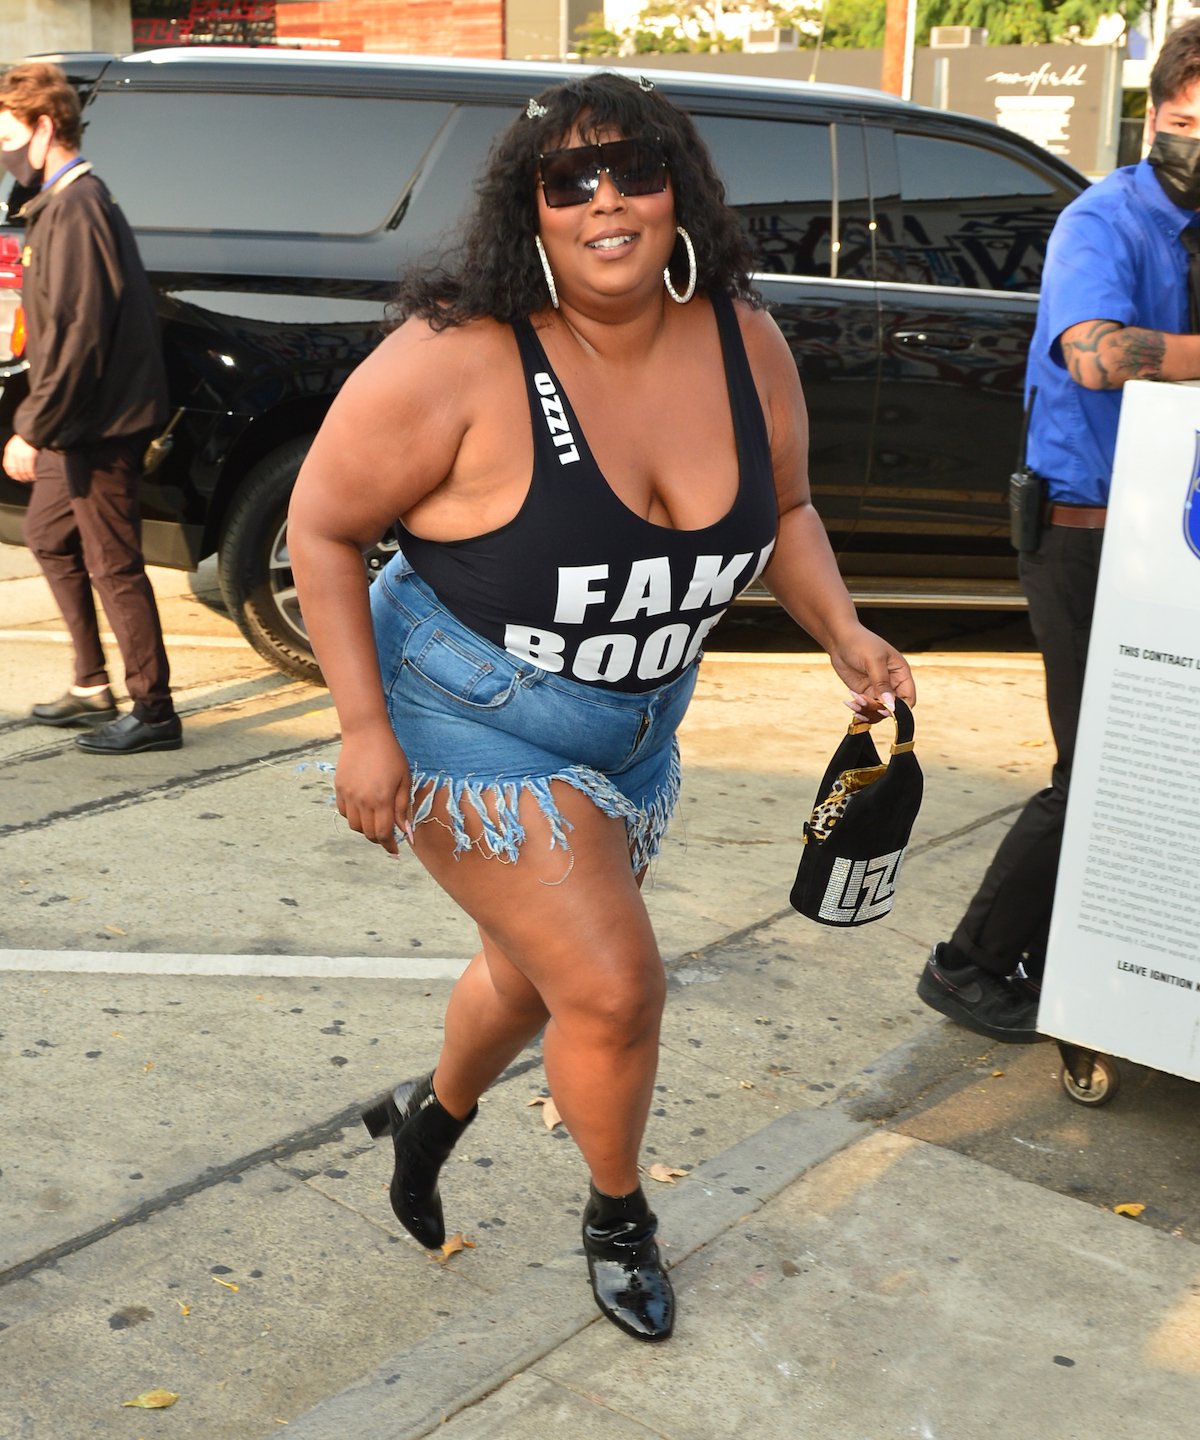 Lizzo is seen in a black leotard with white lettering reading "Fake Boobs" on August 23, 2021 in Los Angeles, California.